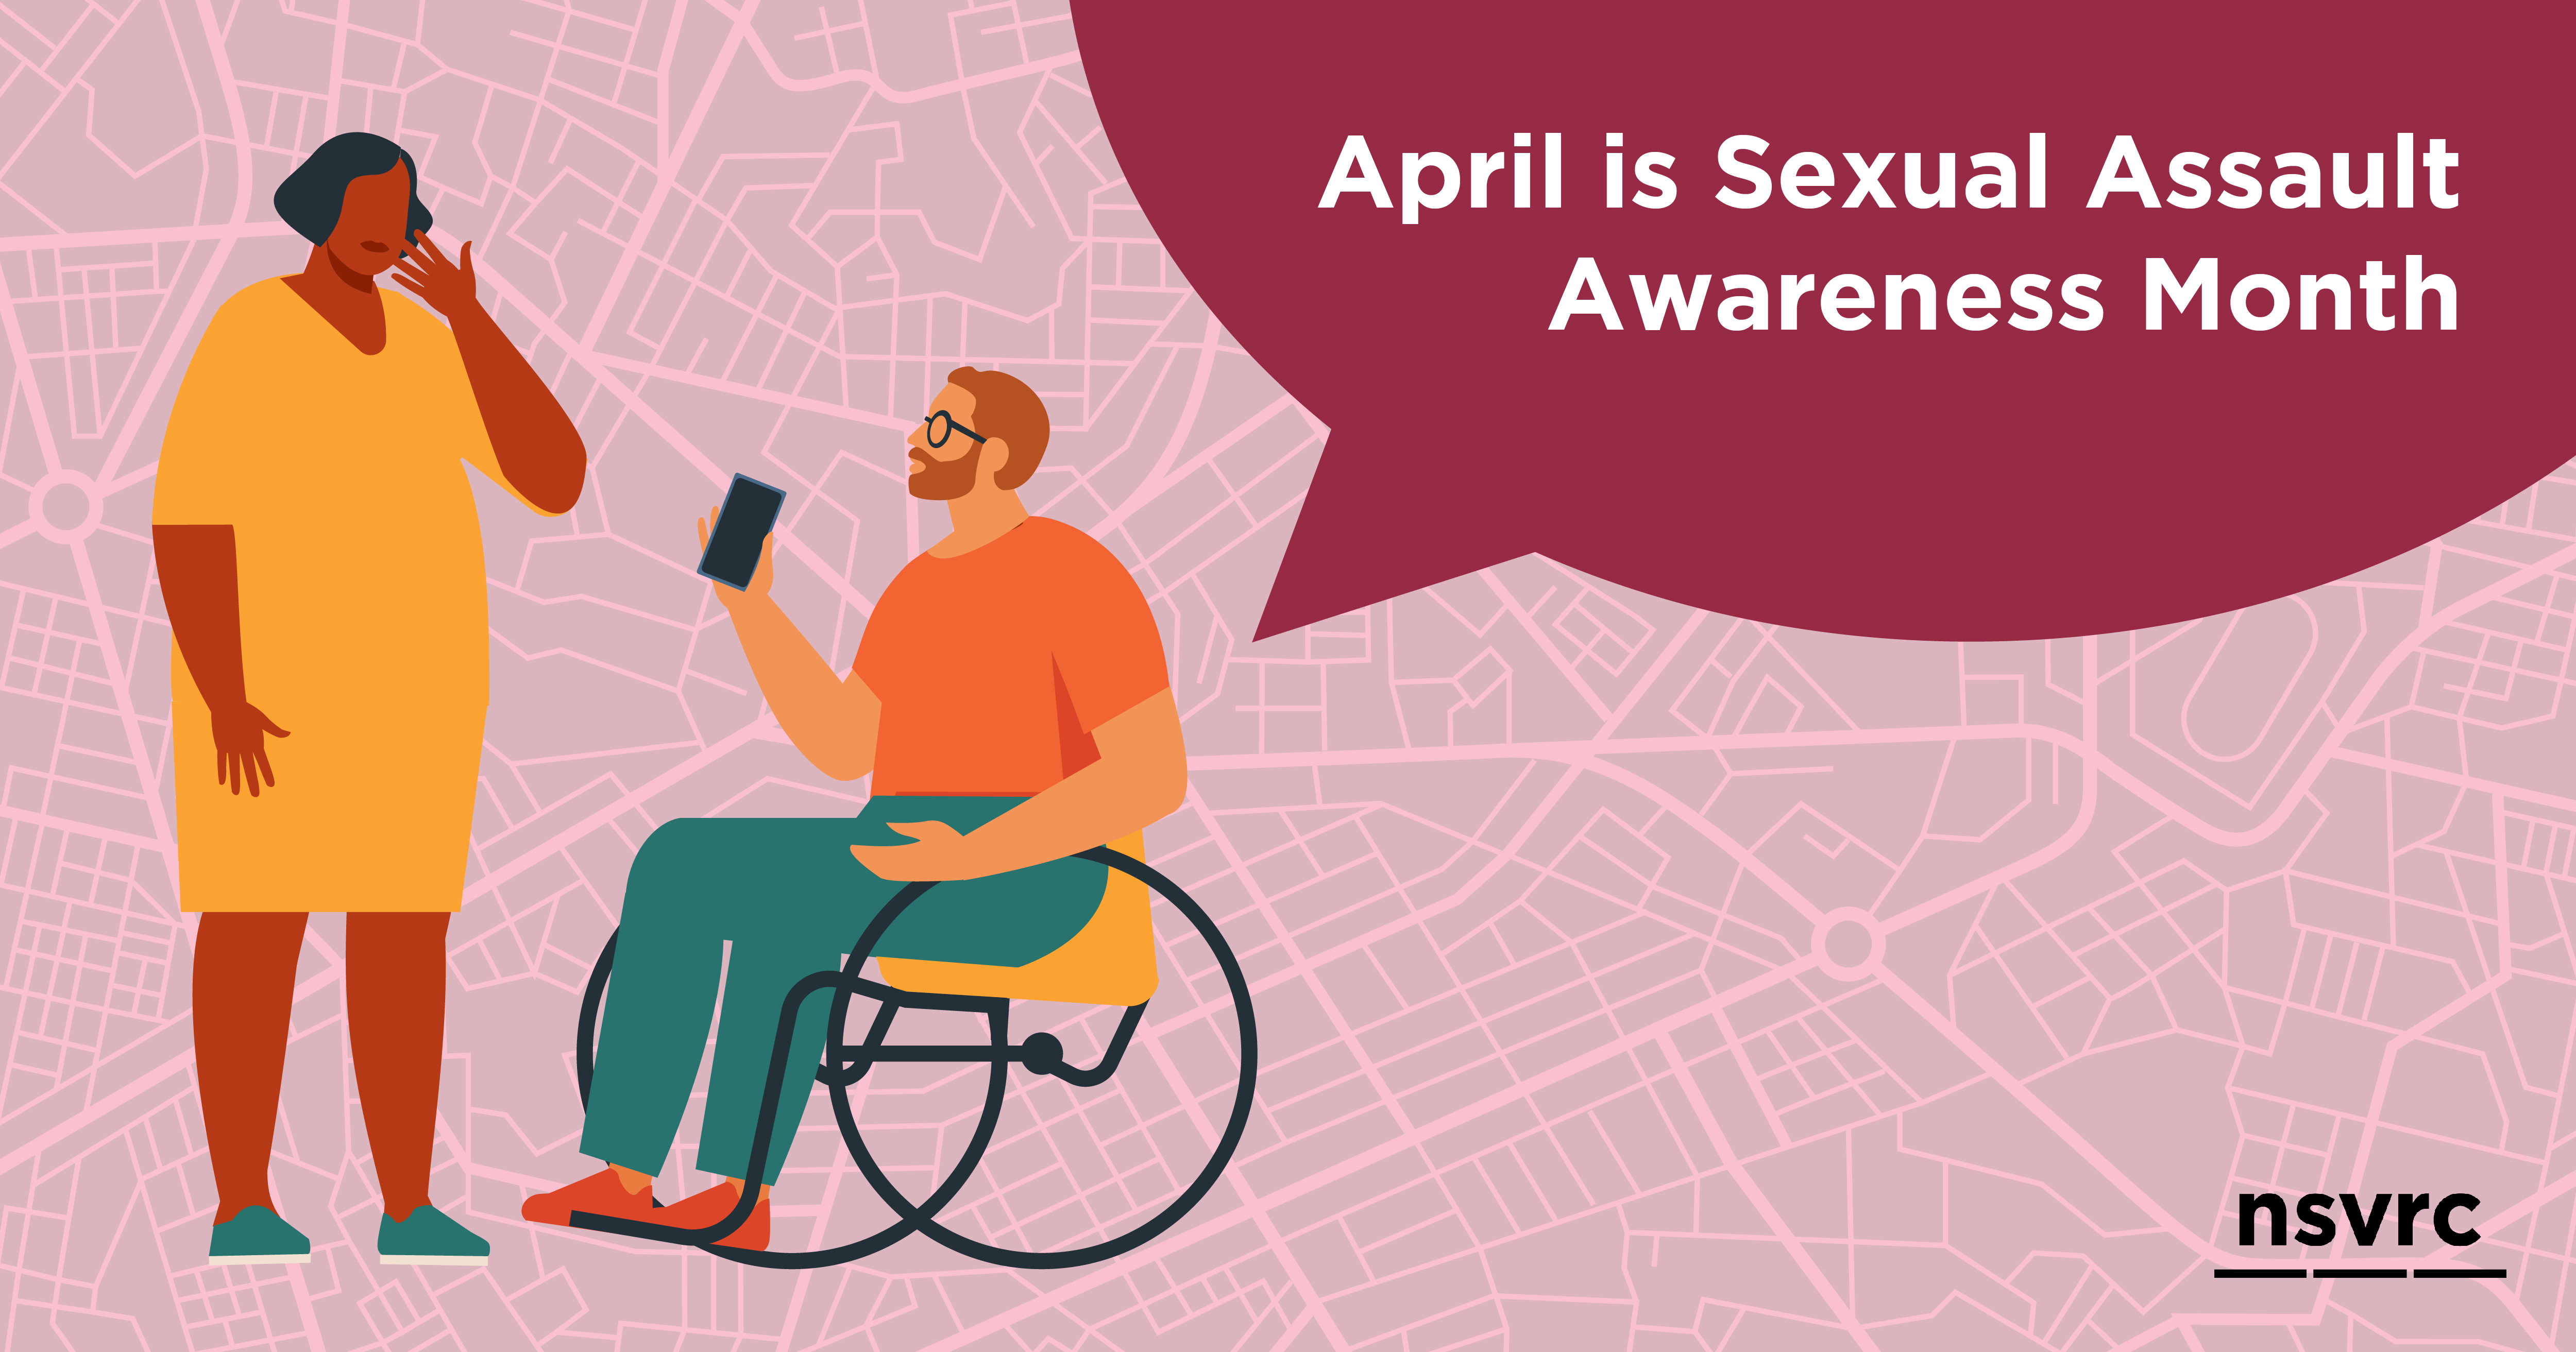 graphic of a person standing and a person sitting in a wheel chair with text that reads "April is Sexual Assault Awareness Month"